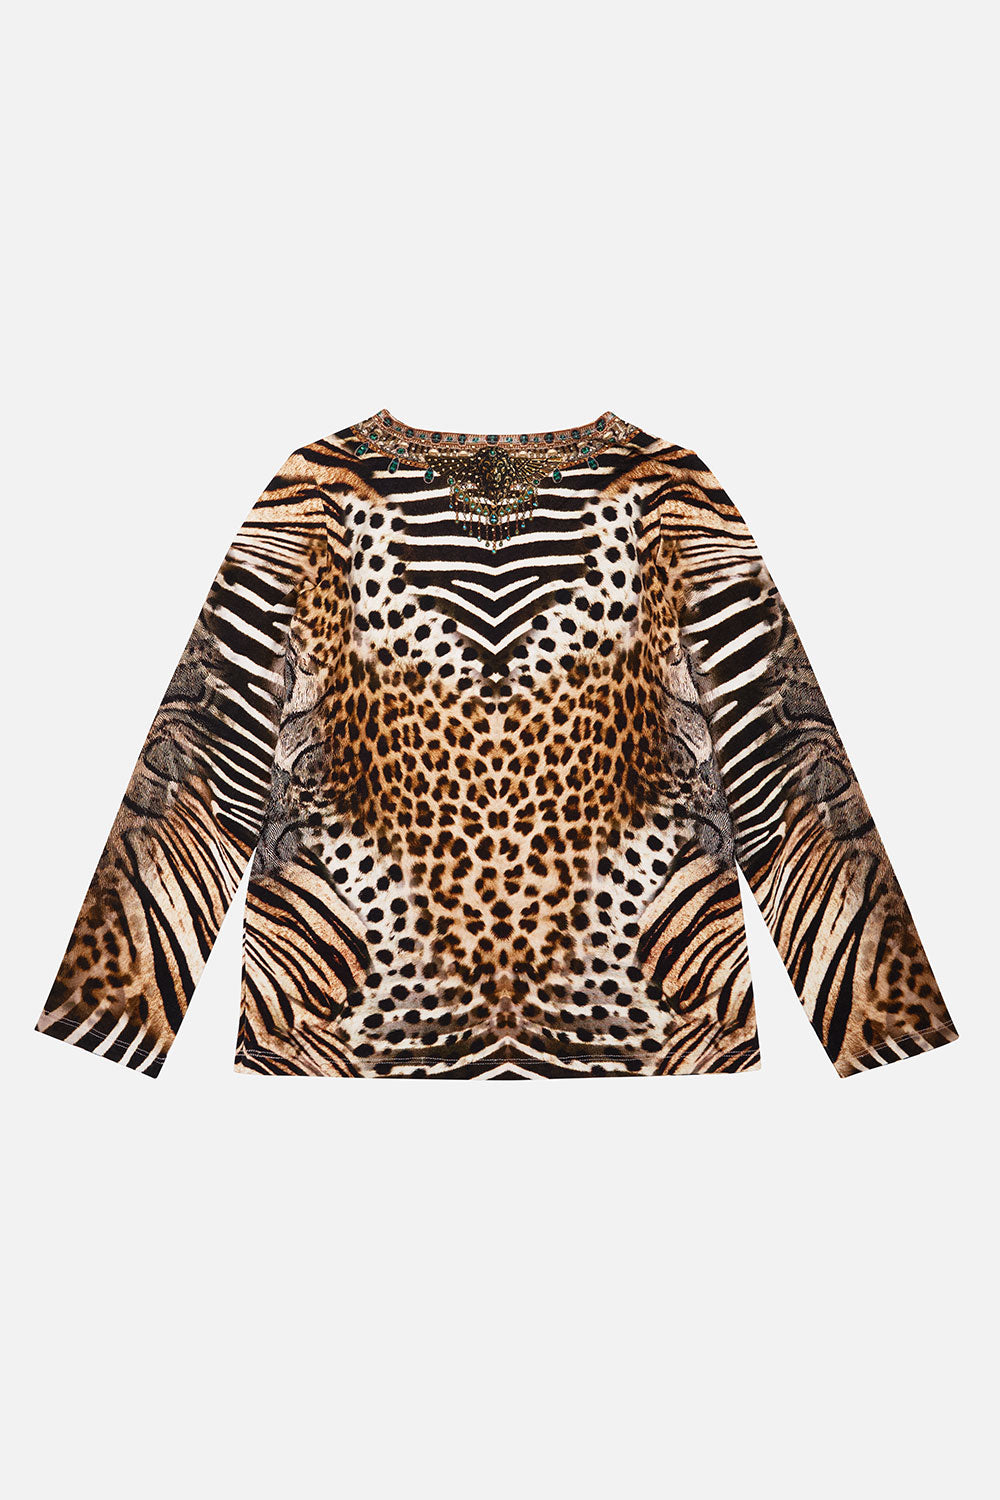 KIDS LONG SLEEVE TOP 12-14 FOR THE LOVE OF LEO